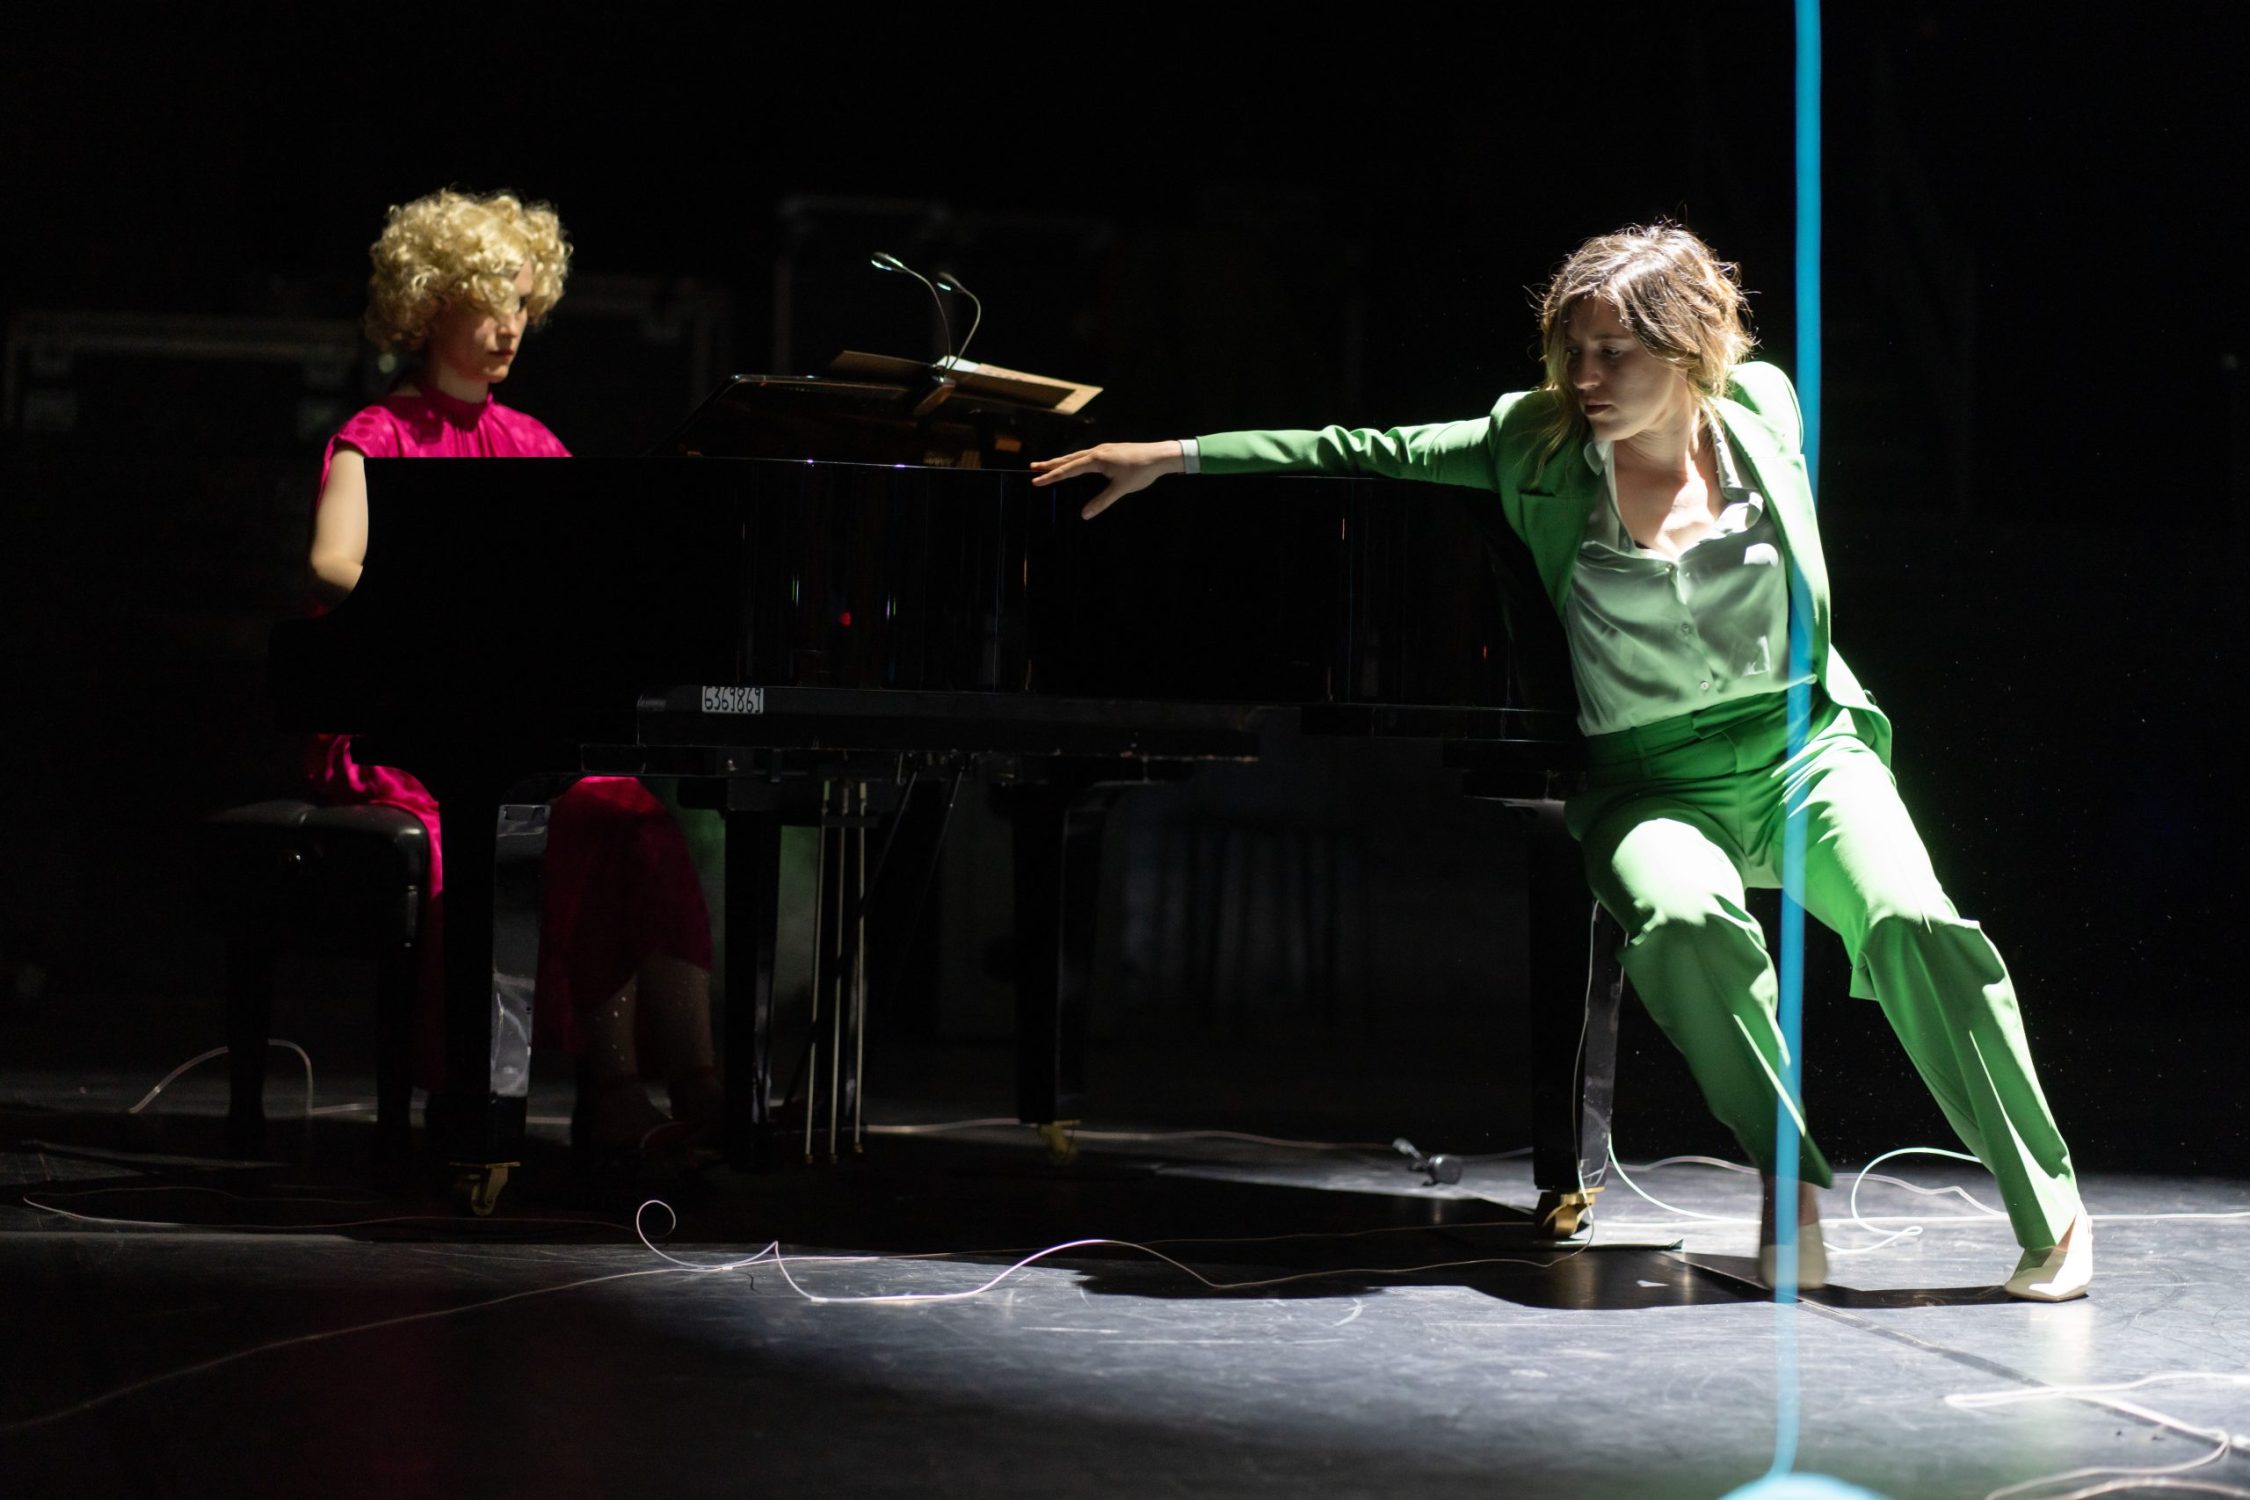 A woman wearing a pastel green suit with her hands stretched holding onto a grand piano. Sitting at the piano is a woman with blonde curly hair wearing a long pink dress.